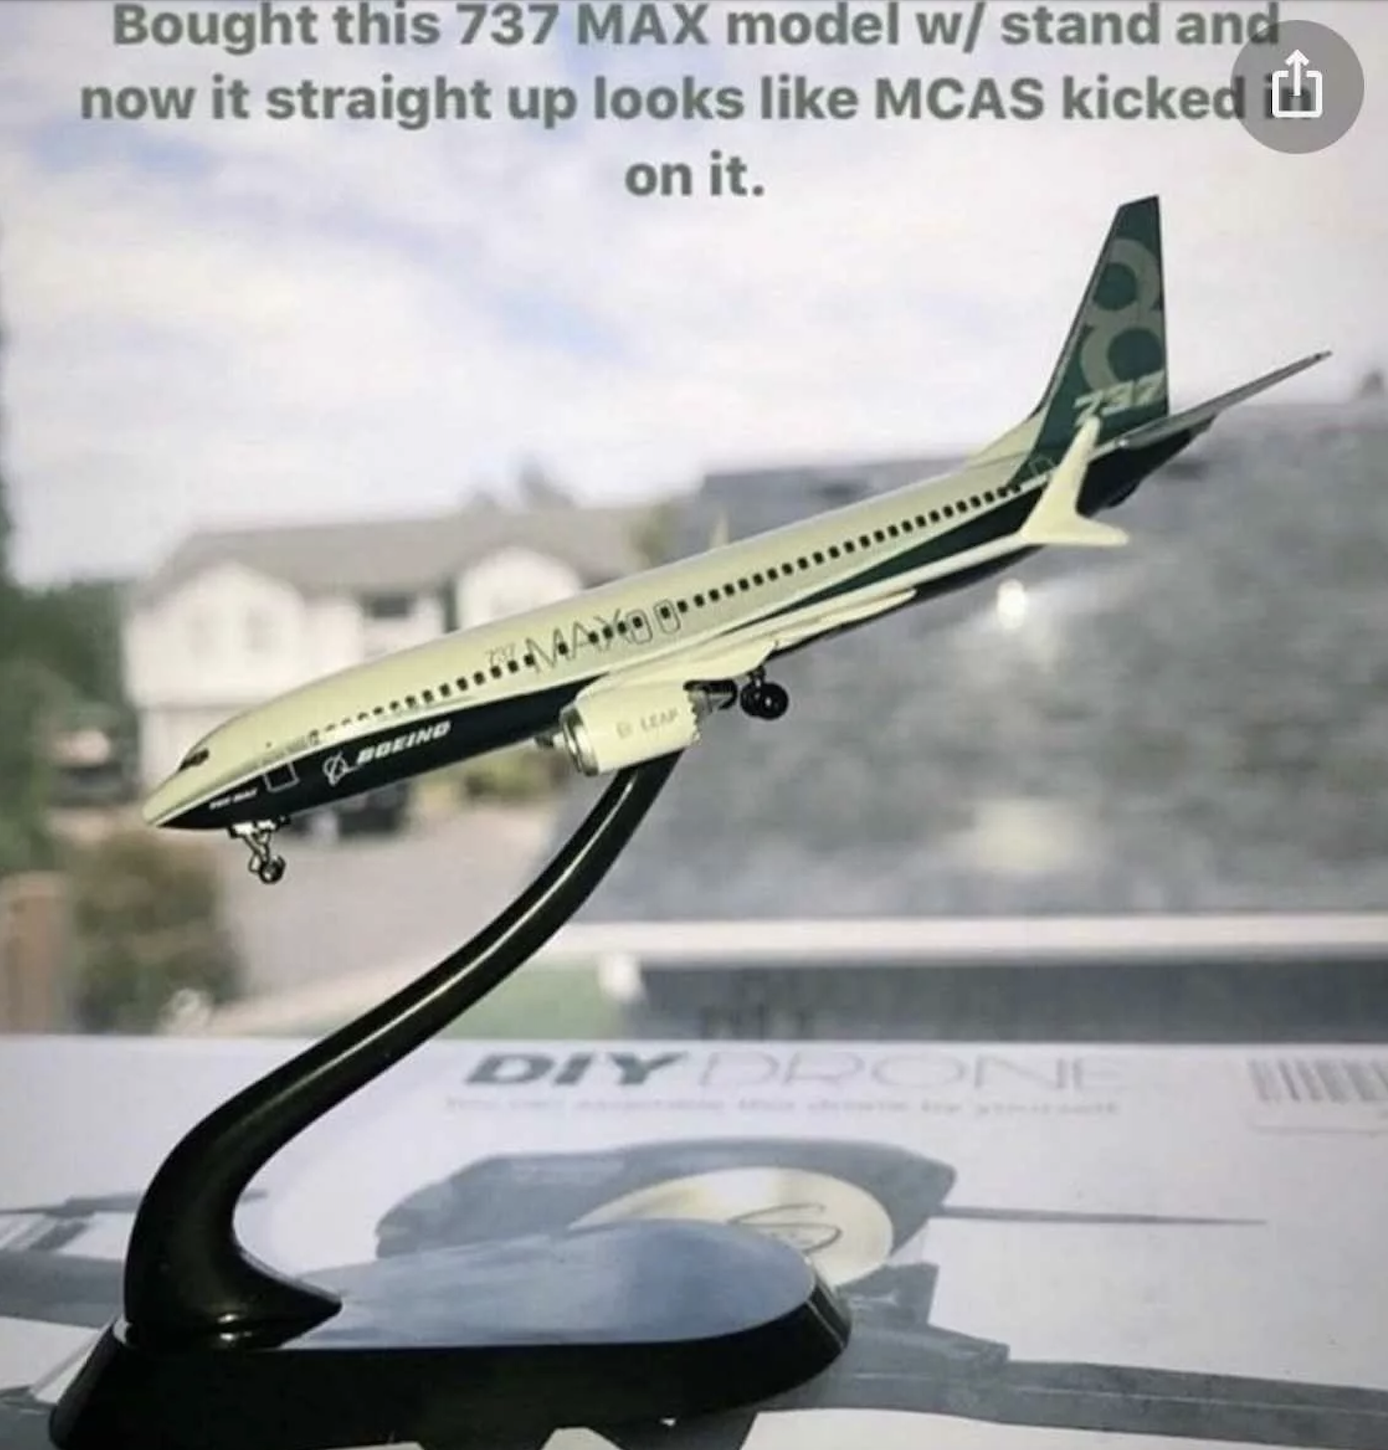 airline - Bought this 737 Max model w stand and now it straight up looks Mcas kicked on it. Boeing Diy Drone